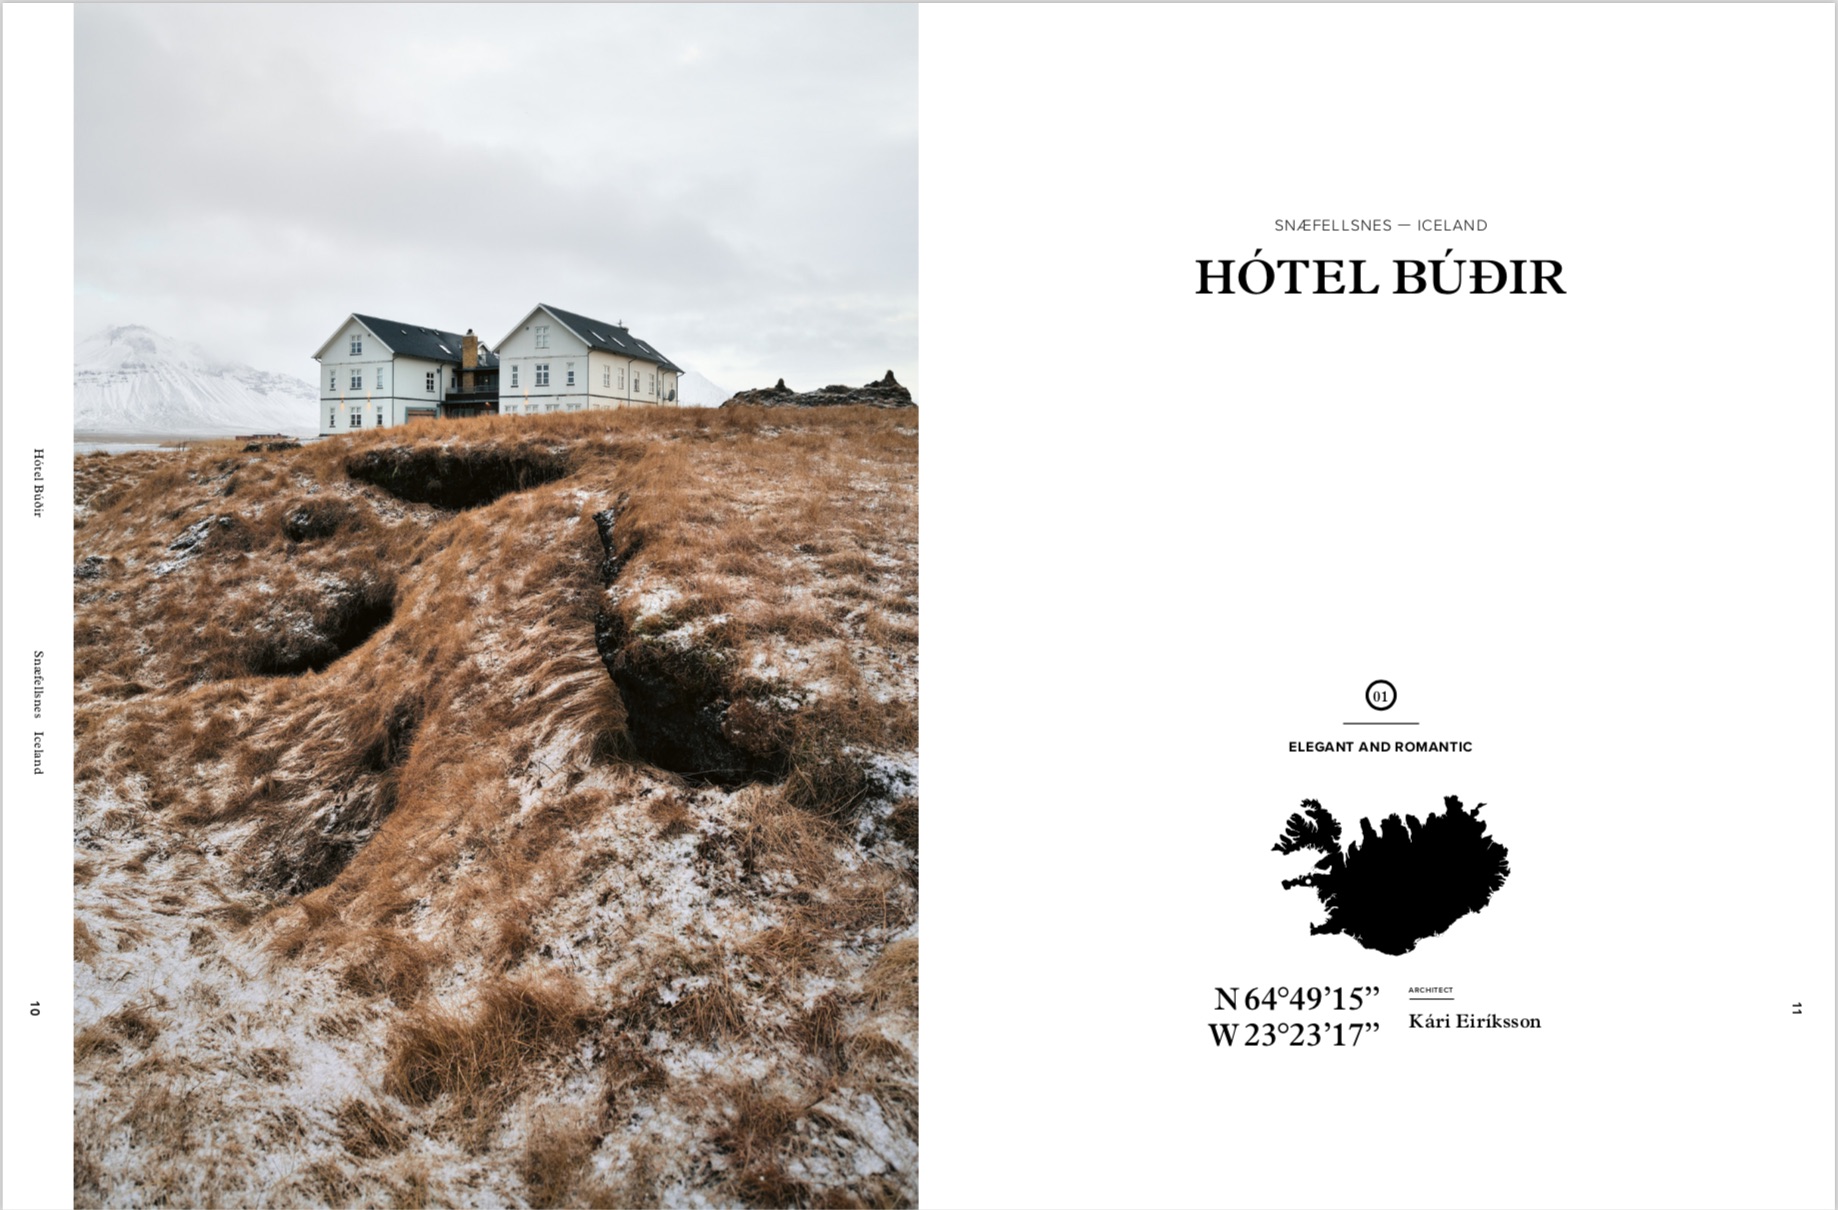 By Debbie Pappyn, David De Vleeschauwer from Remote Places to Stay: The Most Unique Hotels at the End of the World copyright Gestalten 2019